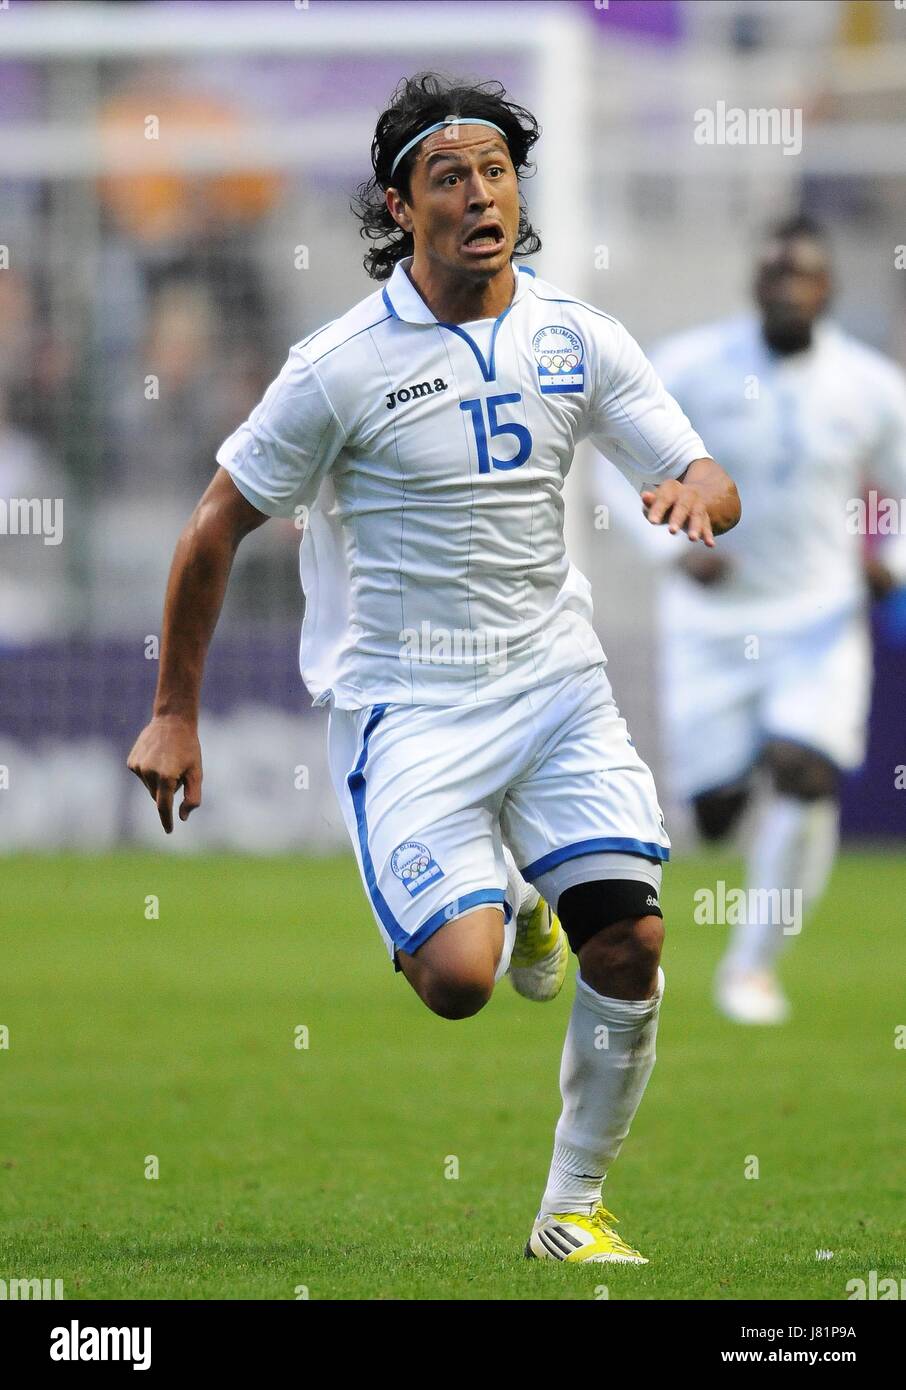 ROGER ESPINOZA HONDURAS & KANAS CITY WIZARDS LONDON 2012 OLYMPIC GAMES FOOTBALL, SPAIN V HONDURAS ST JAMES PARK, NEWCASTLE, ENGLAND 29 July 2012 GAN55740     WARNING! This Photograph May Only Be Used For Newspaper And/Or Magazine Editorial Purposes. May Not Be Used For Publications Involving 1 player, 1 Club Or 1 Competition  Without Written Authorisation From Football DataCo Ltd. For Any Queries, Please Contact Football DataCo Ltd on +44 (0) 207 864 9121 Stock Photo